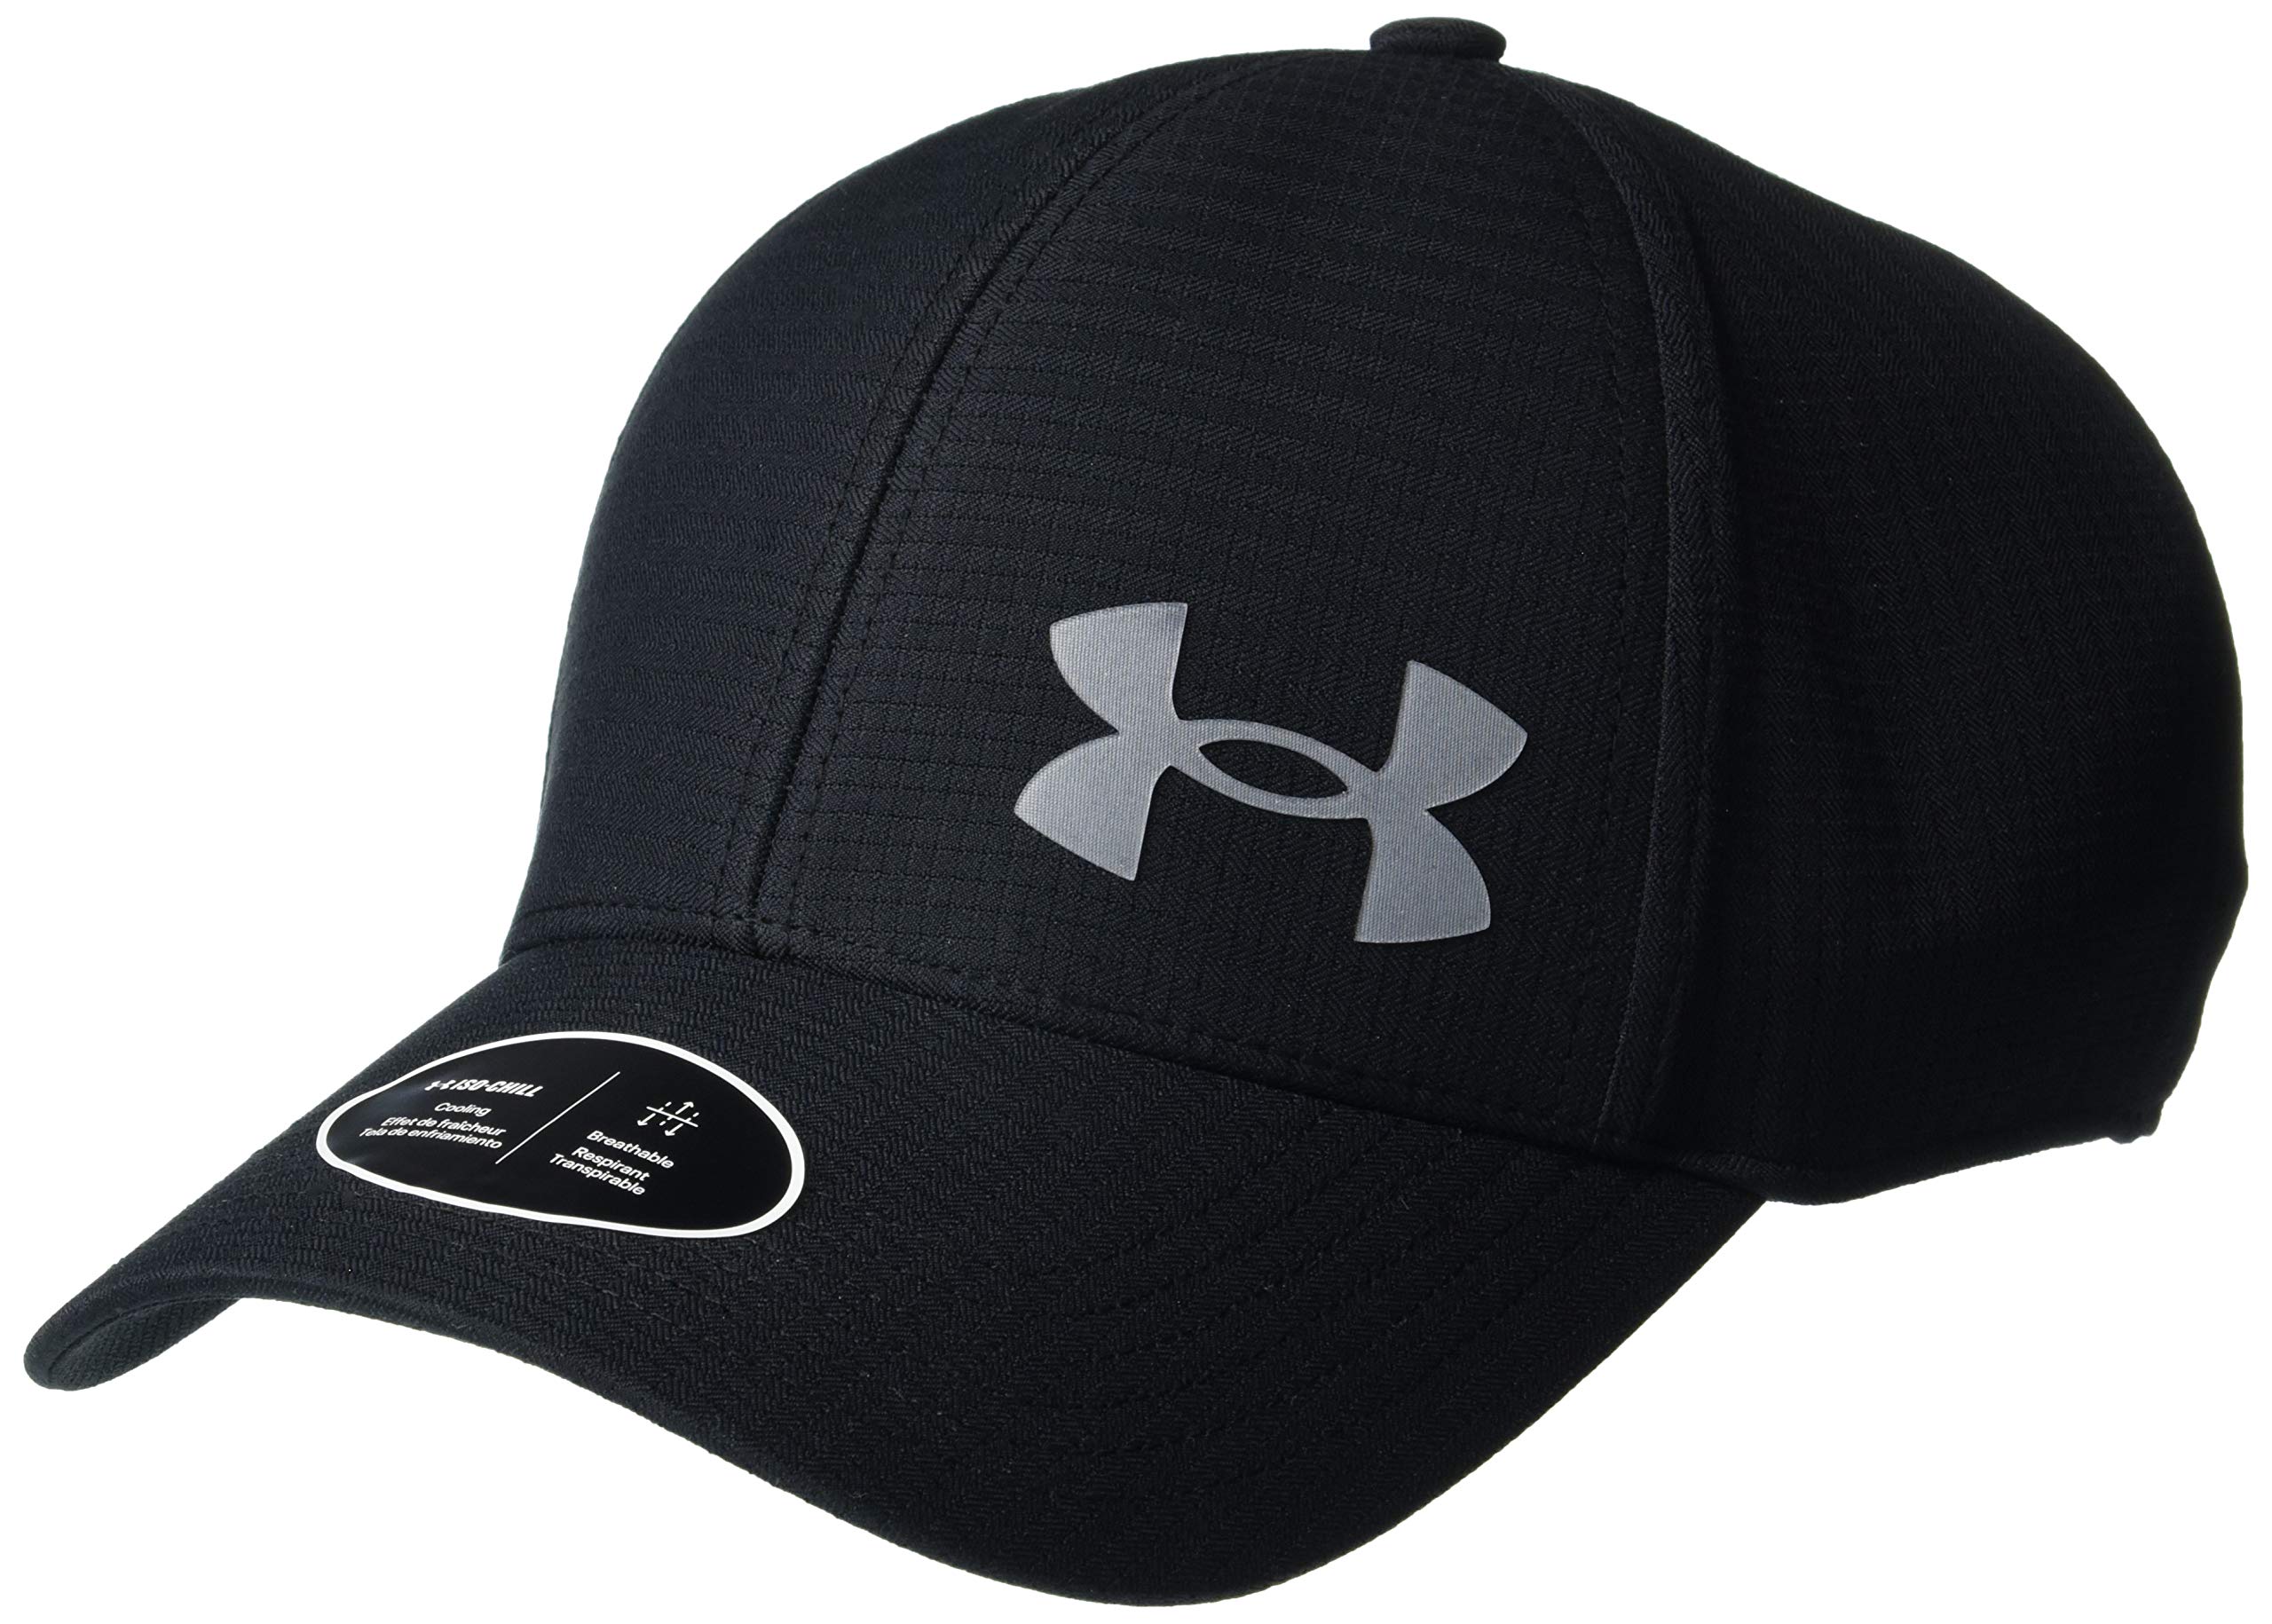 Under Armour Men's Iso-chill ArmourVent Fitted Baseball Cap Black  (001)/Pitch Gray X-Large-XX-Large